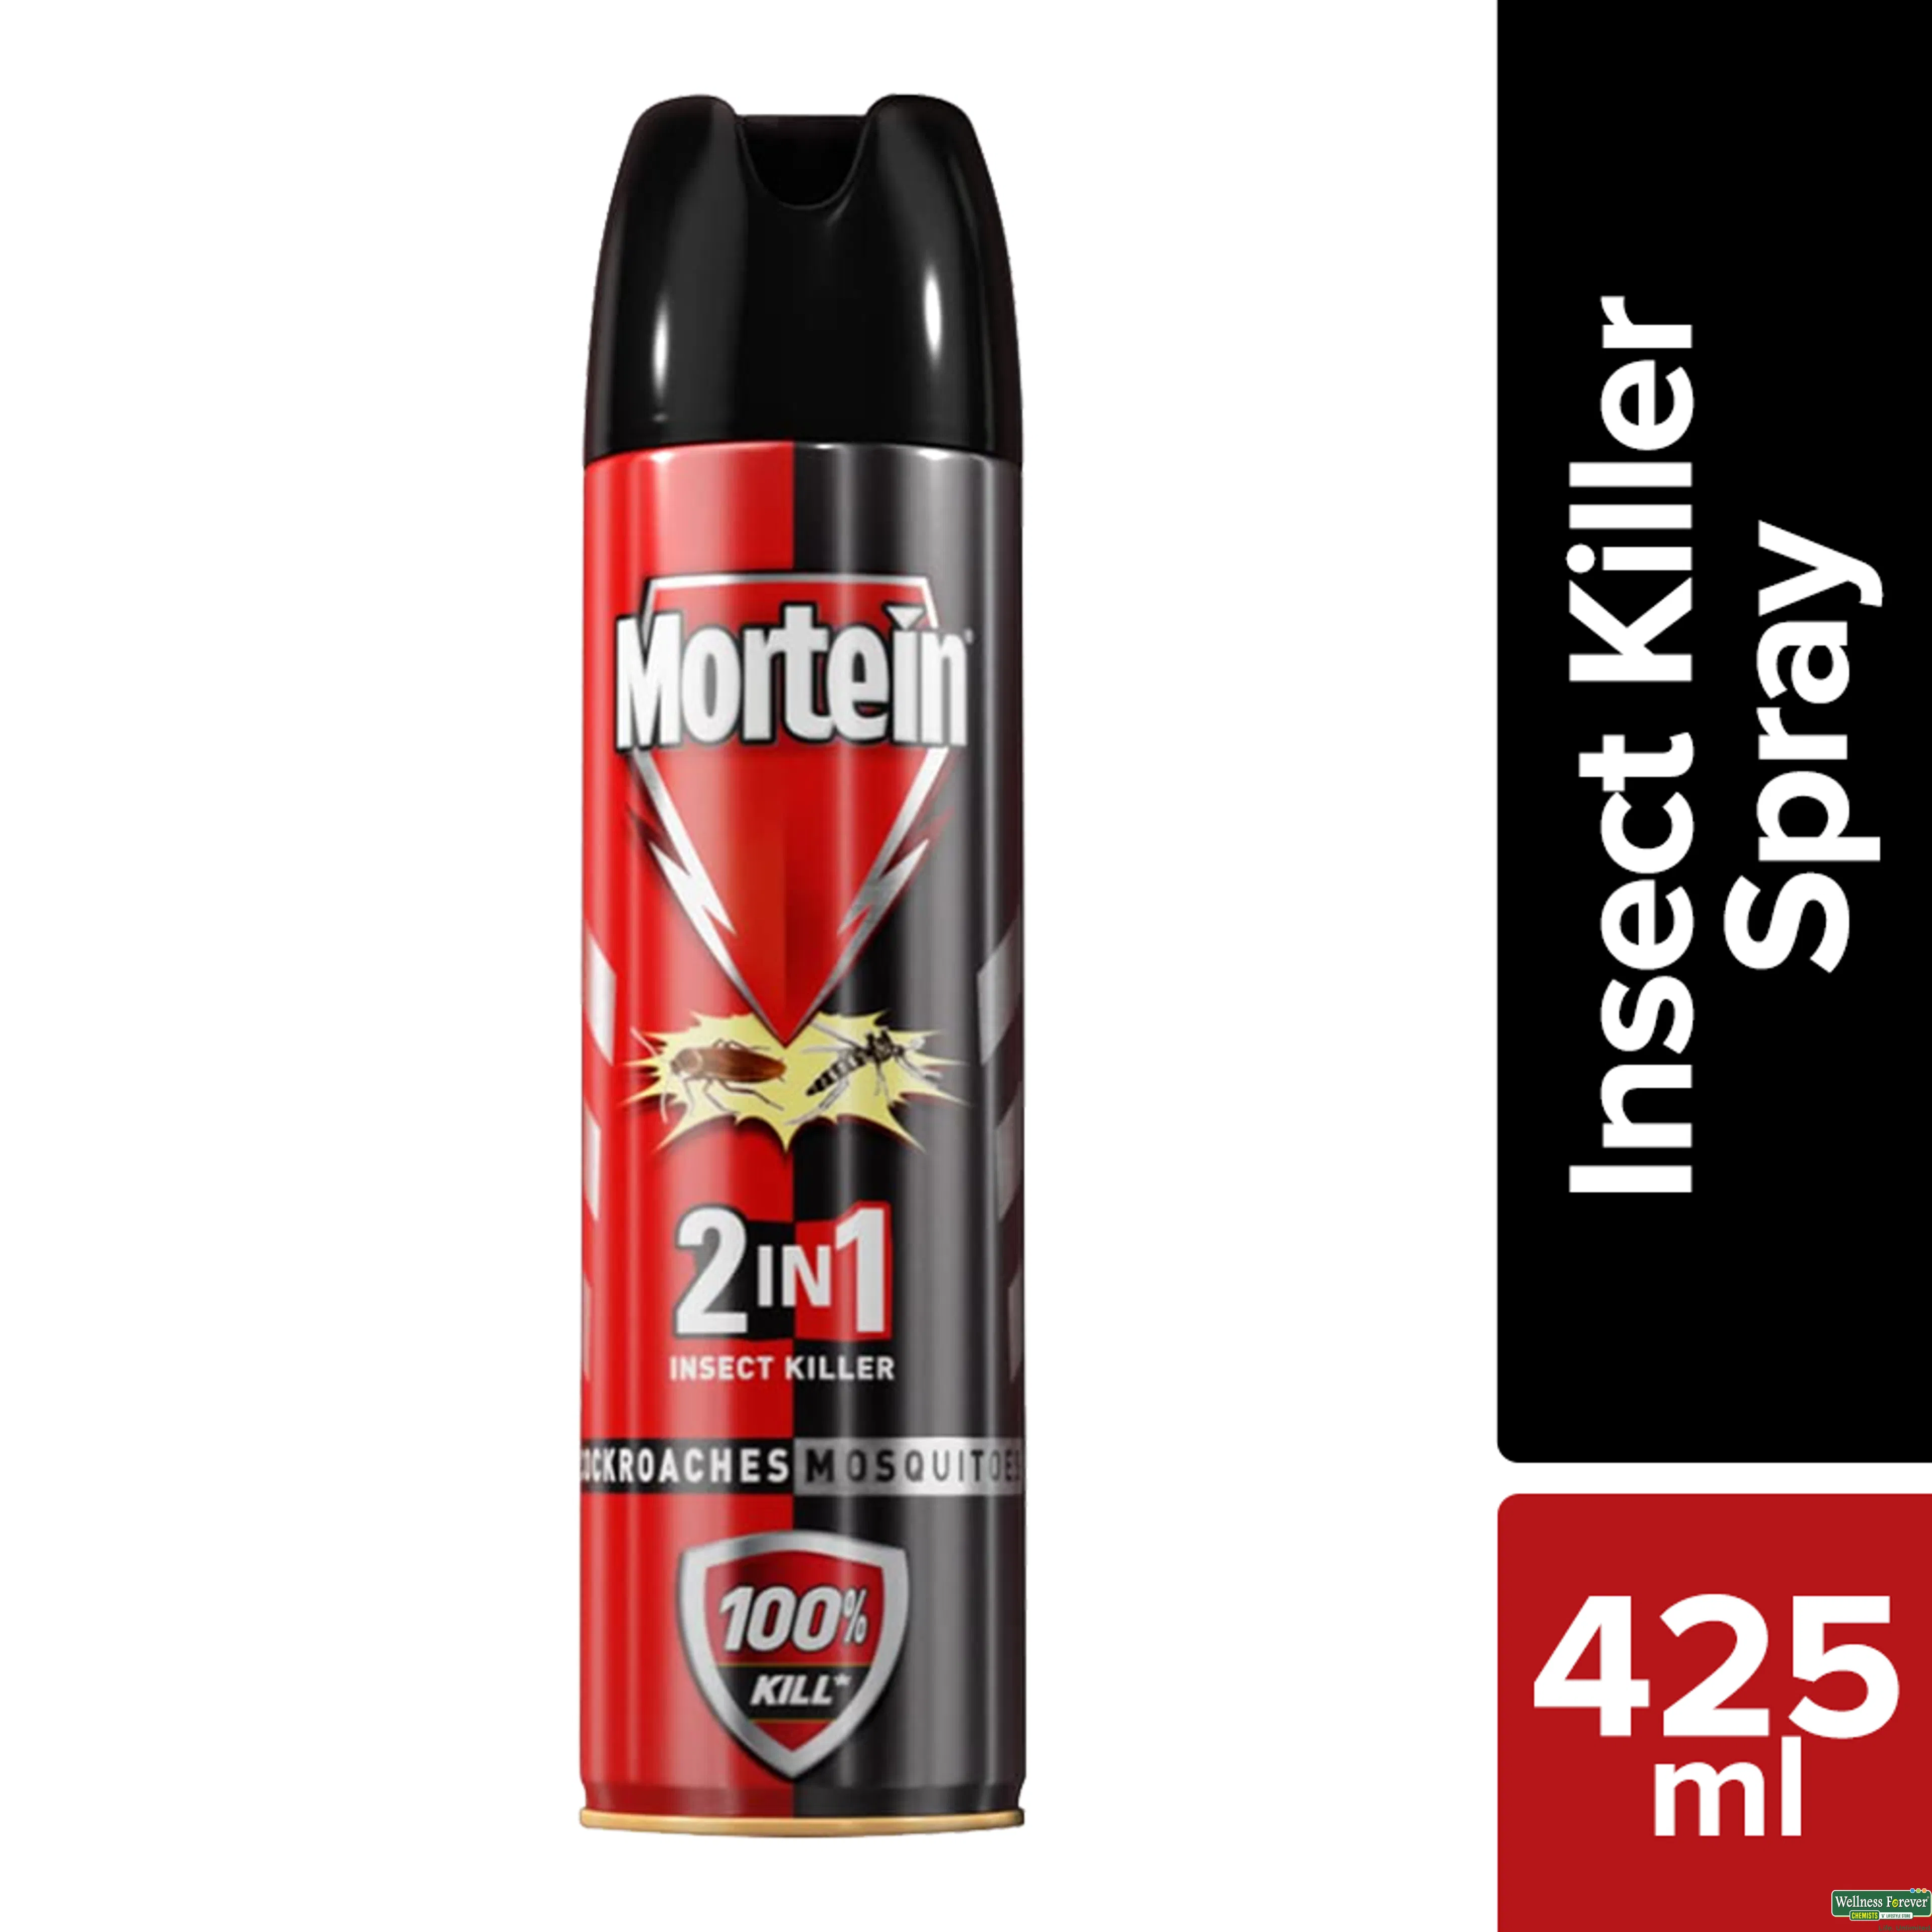 MORTEIN 2 IN 1 INSECT KILLER SPRAY 425ML ##-image